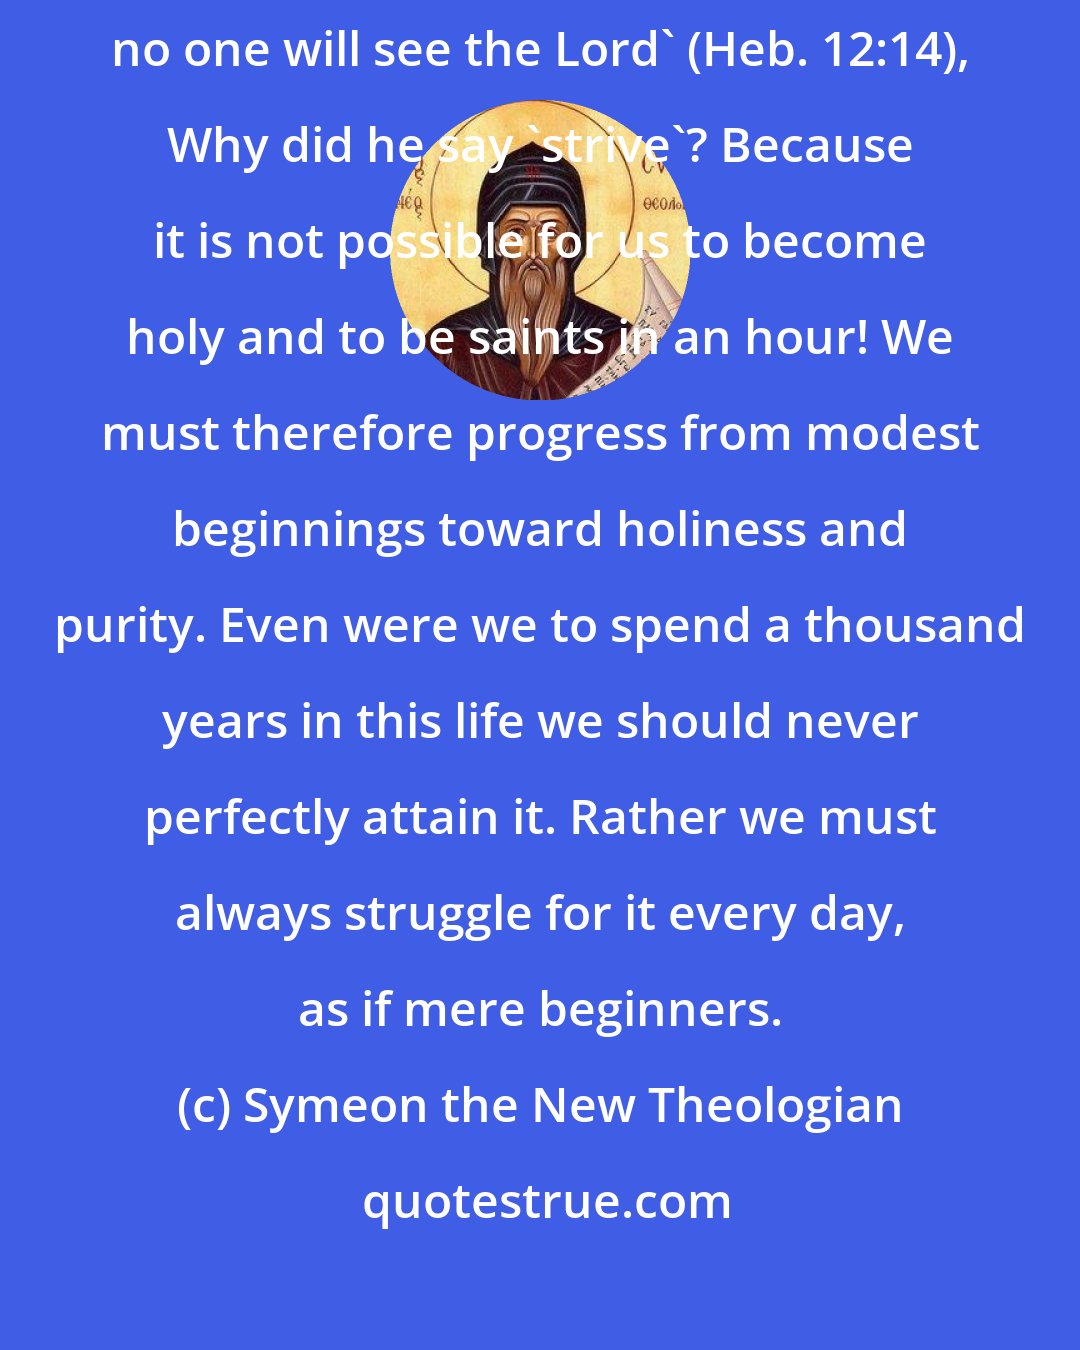 Symeon the New Theologian: 'Strive for peace with all men, and for the holiness without which no one will see the Lord' (Heb. 12:14), Why did he say 'strive'? Because it is not possible for us to become holy and to be saints in an hour! We must therefore progress from modest beginnings toward holiness and purity. Even were we to spend a thousand years in this life we should never perfectly attain it. Rather we must always struggle for it every day, as if mere beginners.